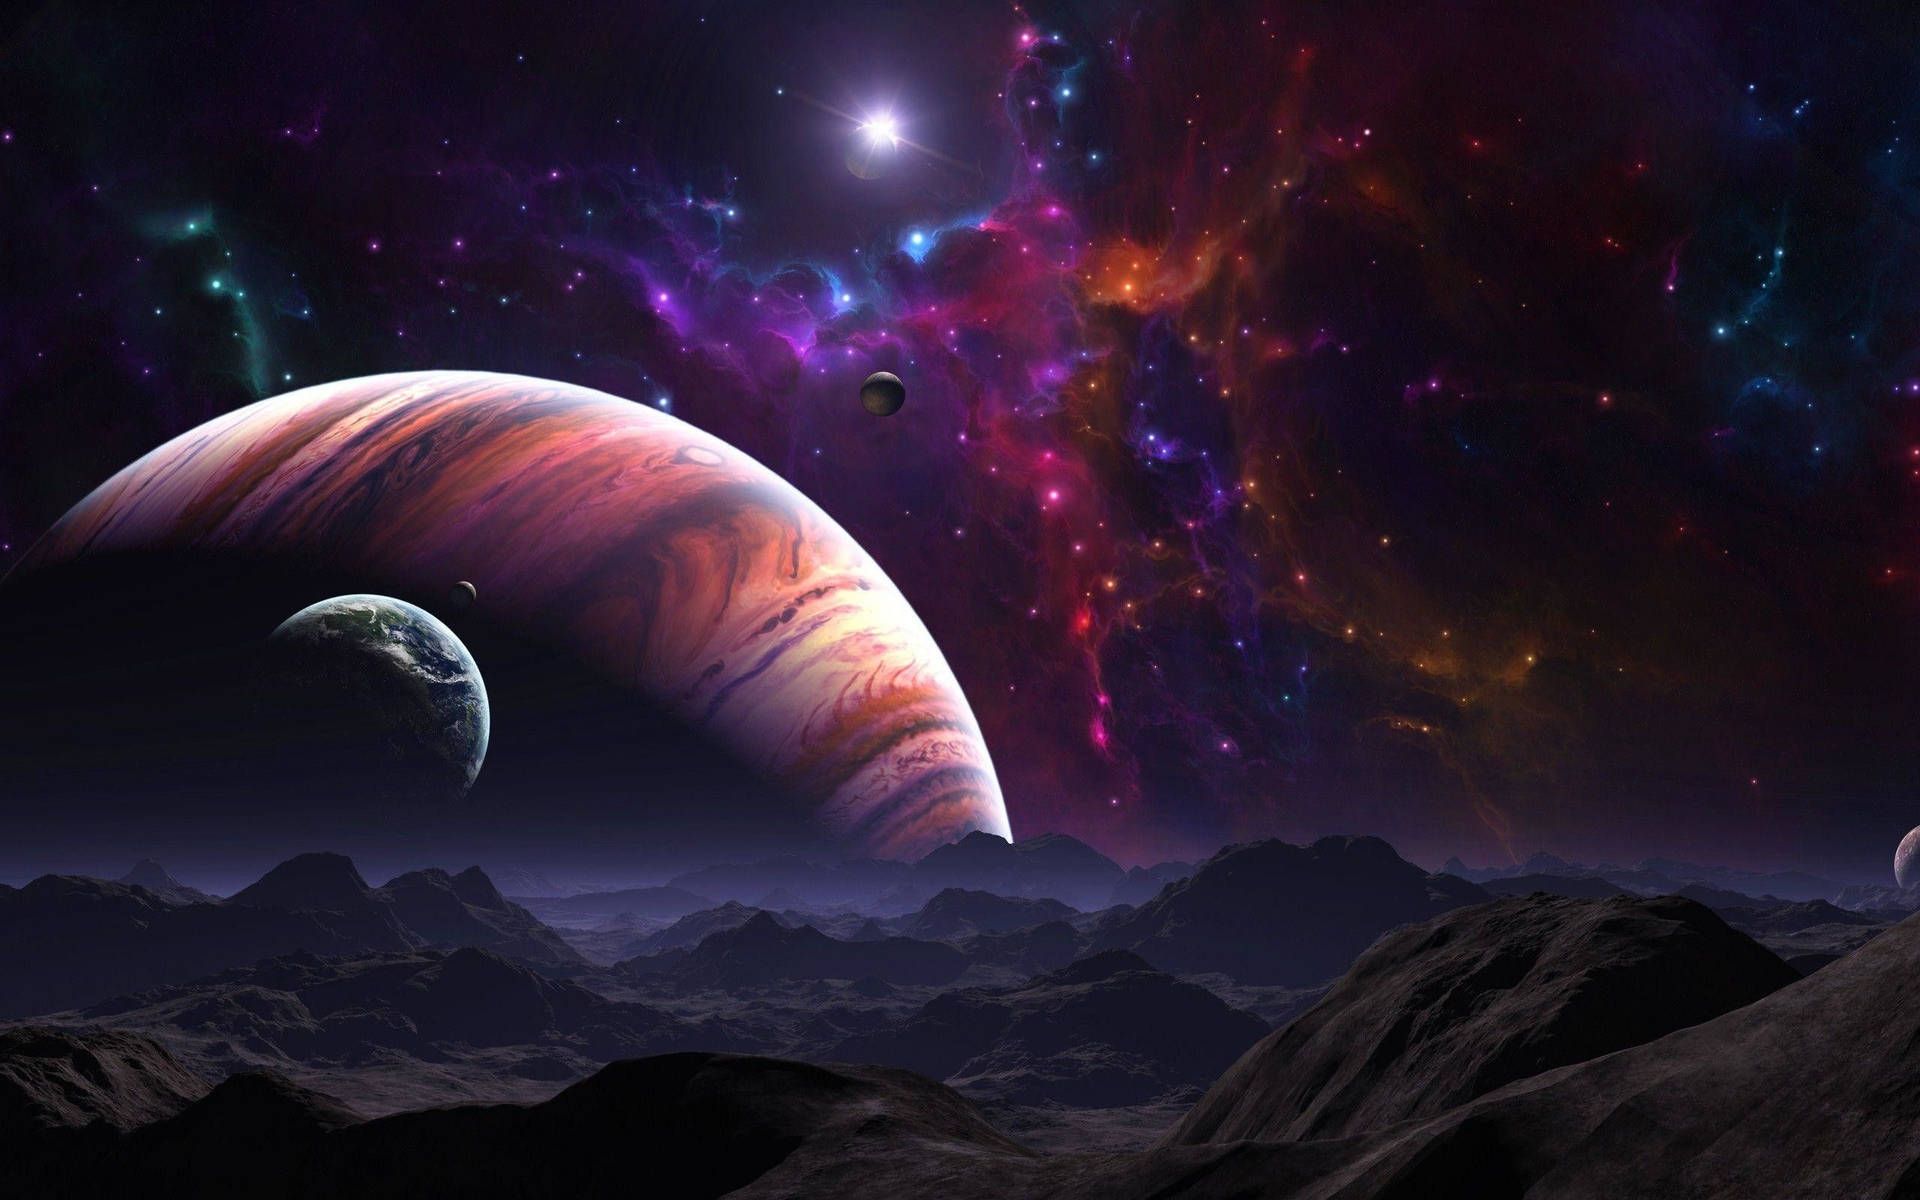 Space wallpaper with colorful planets and stars in the background - Space